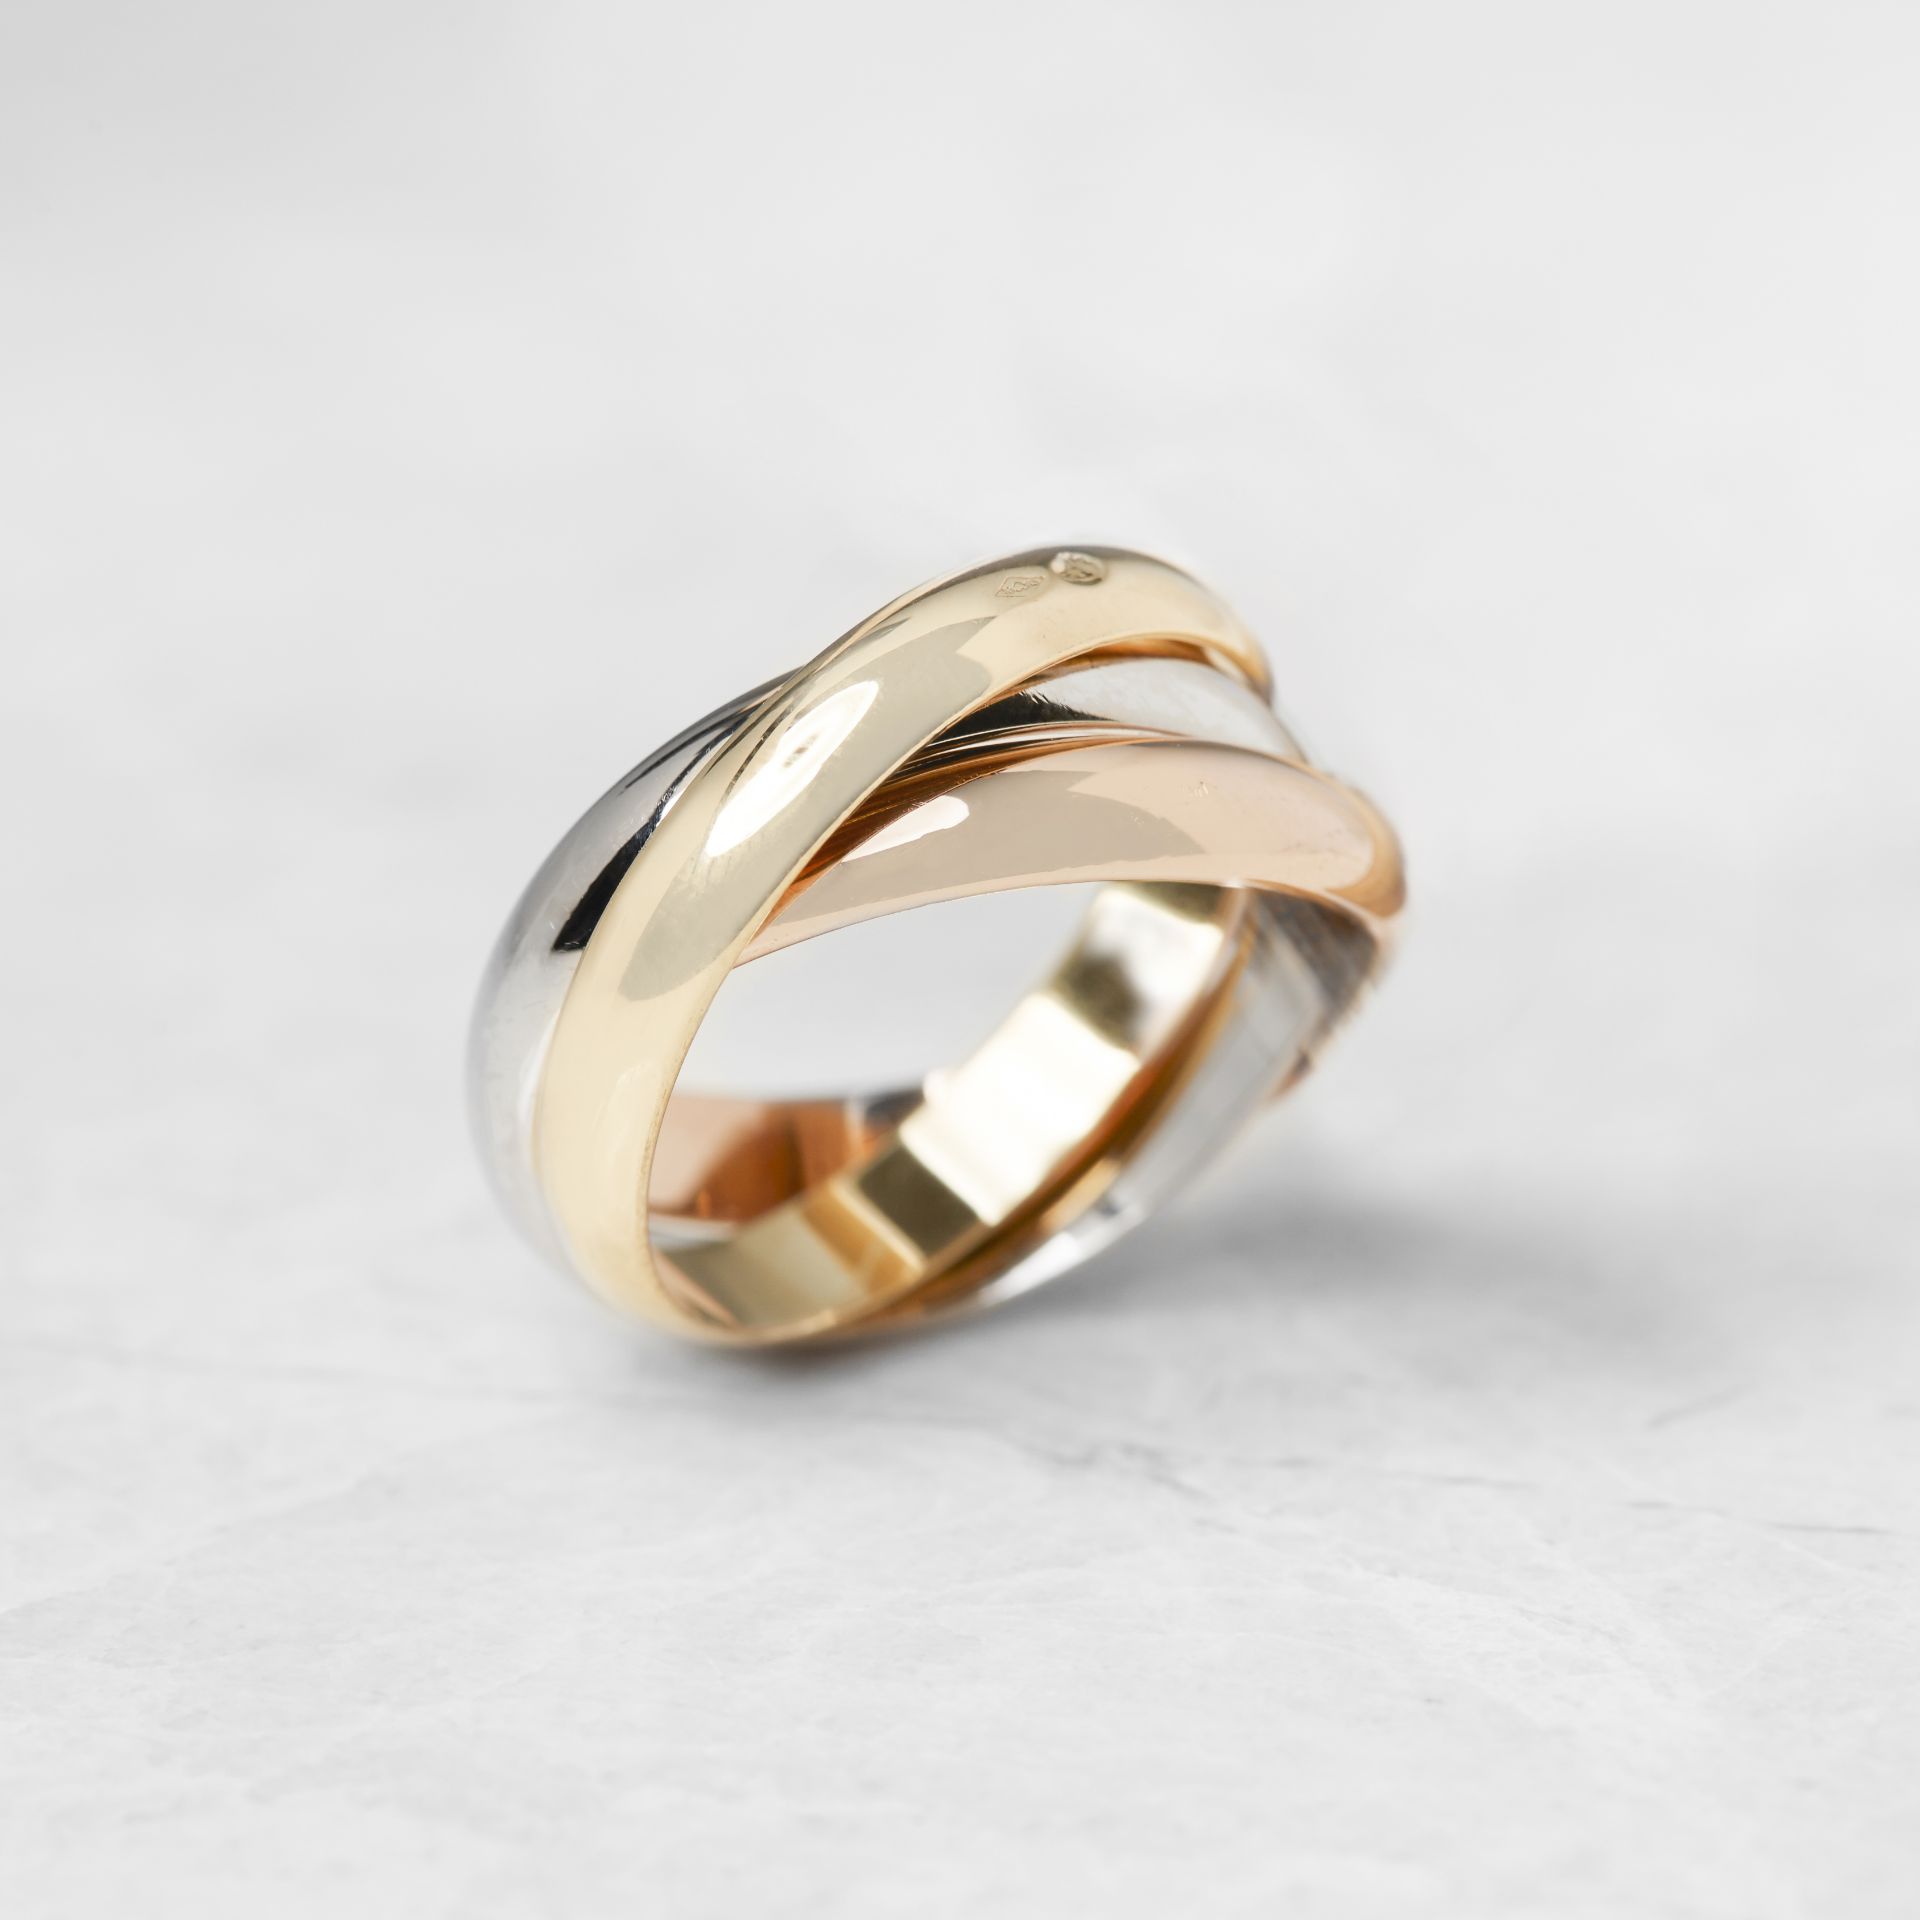 Cartier 18k Yellow, White & Rose Gold Trinity Ring - Image 18 of 18